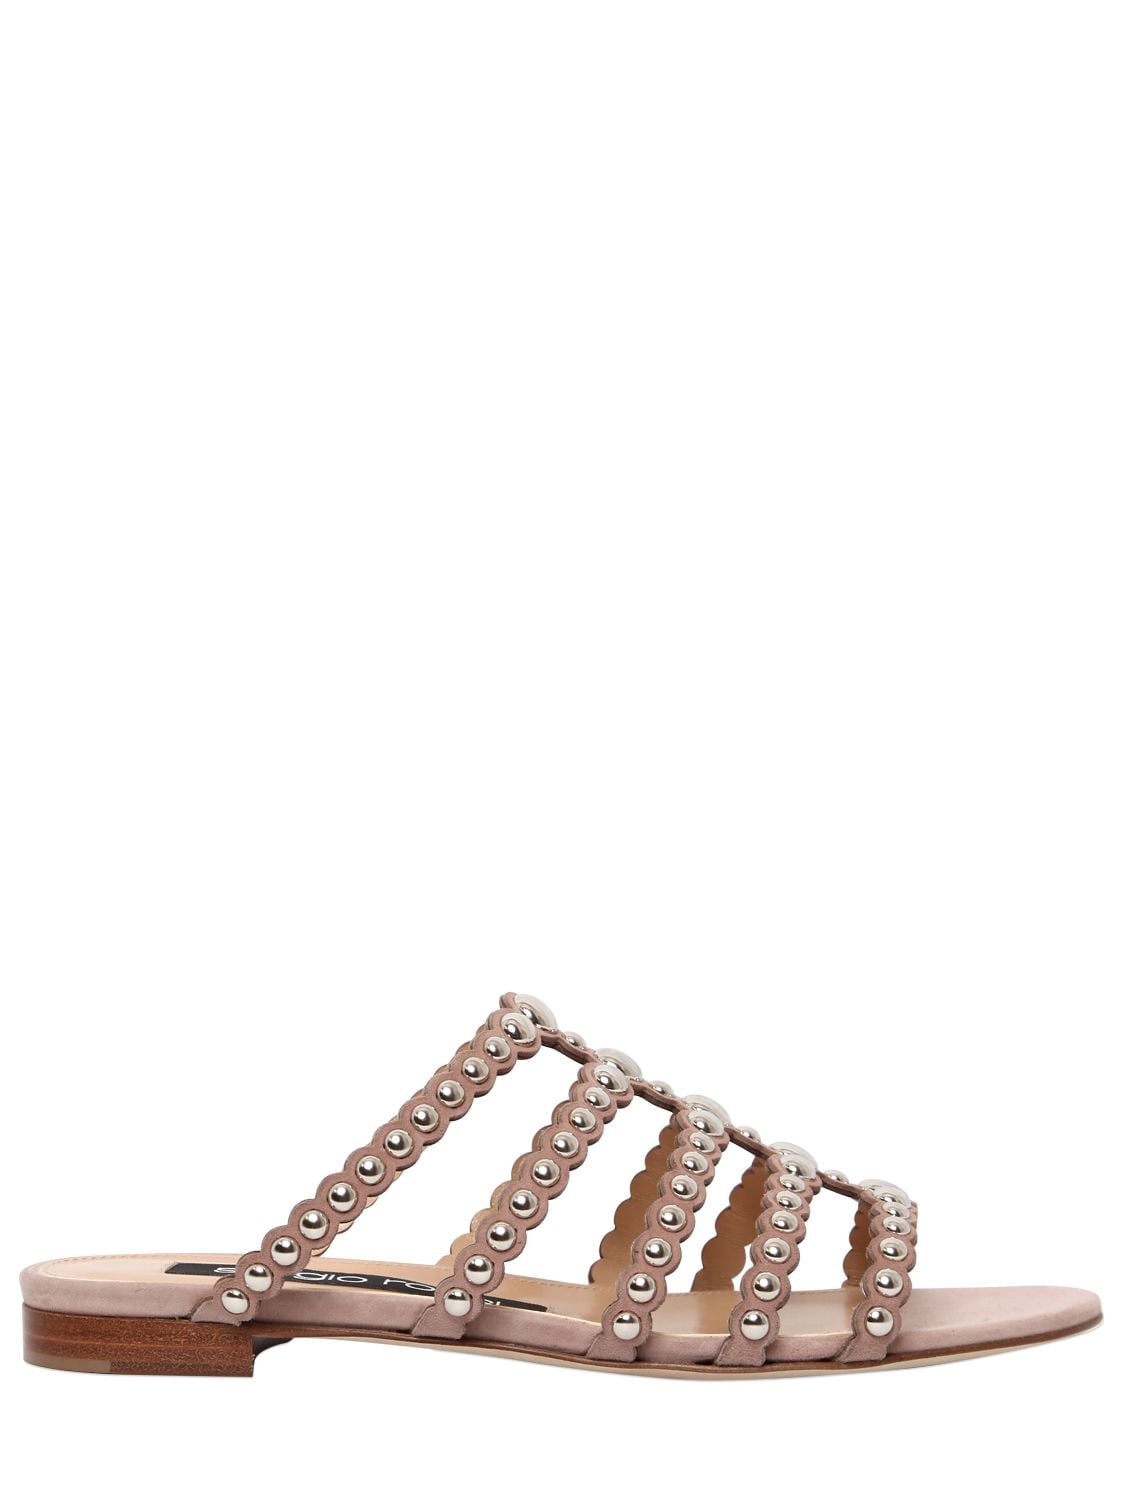 Sergio Rossi 10mm Studded Suede Slide Flats In Blush